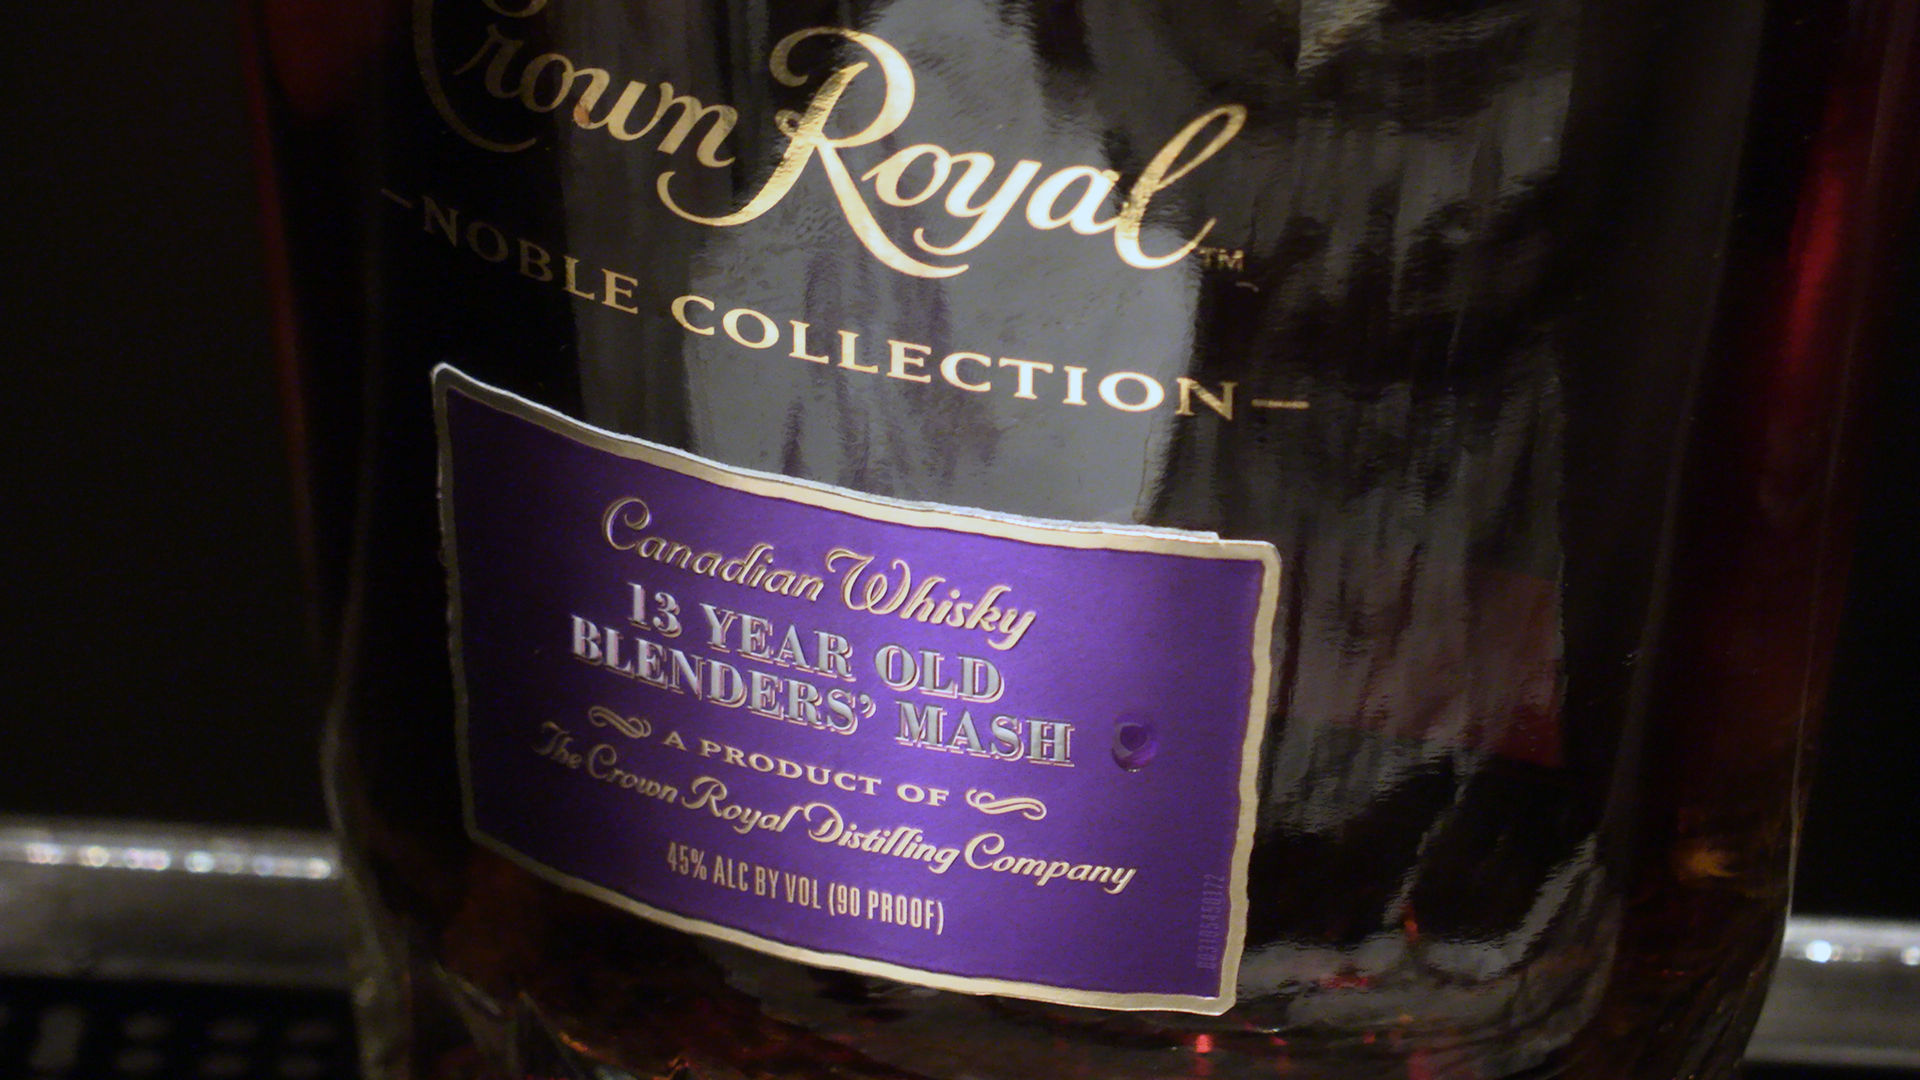 Crown Royal's Noble Collection 13 Year Old Blenders' Mash. Photo ©2018, Mark Gillespie/CaskStrength Media.